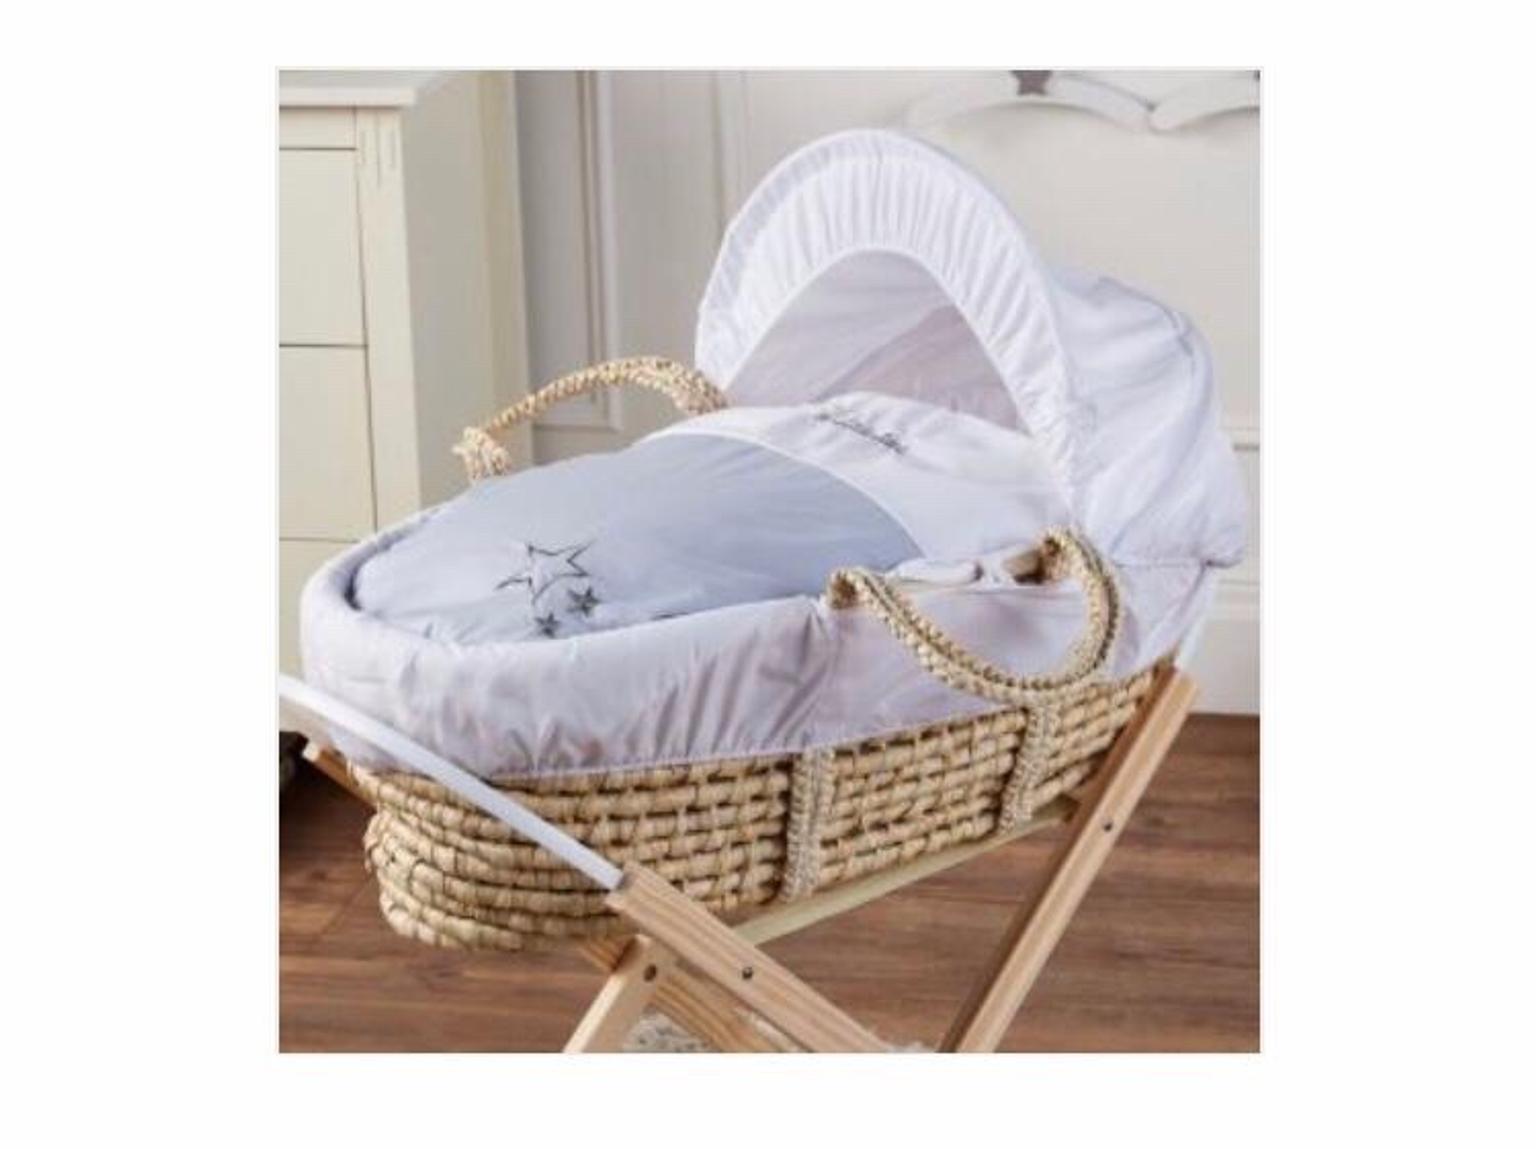 smyths baby moses baskets